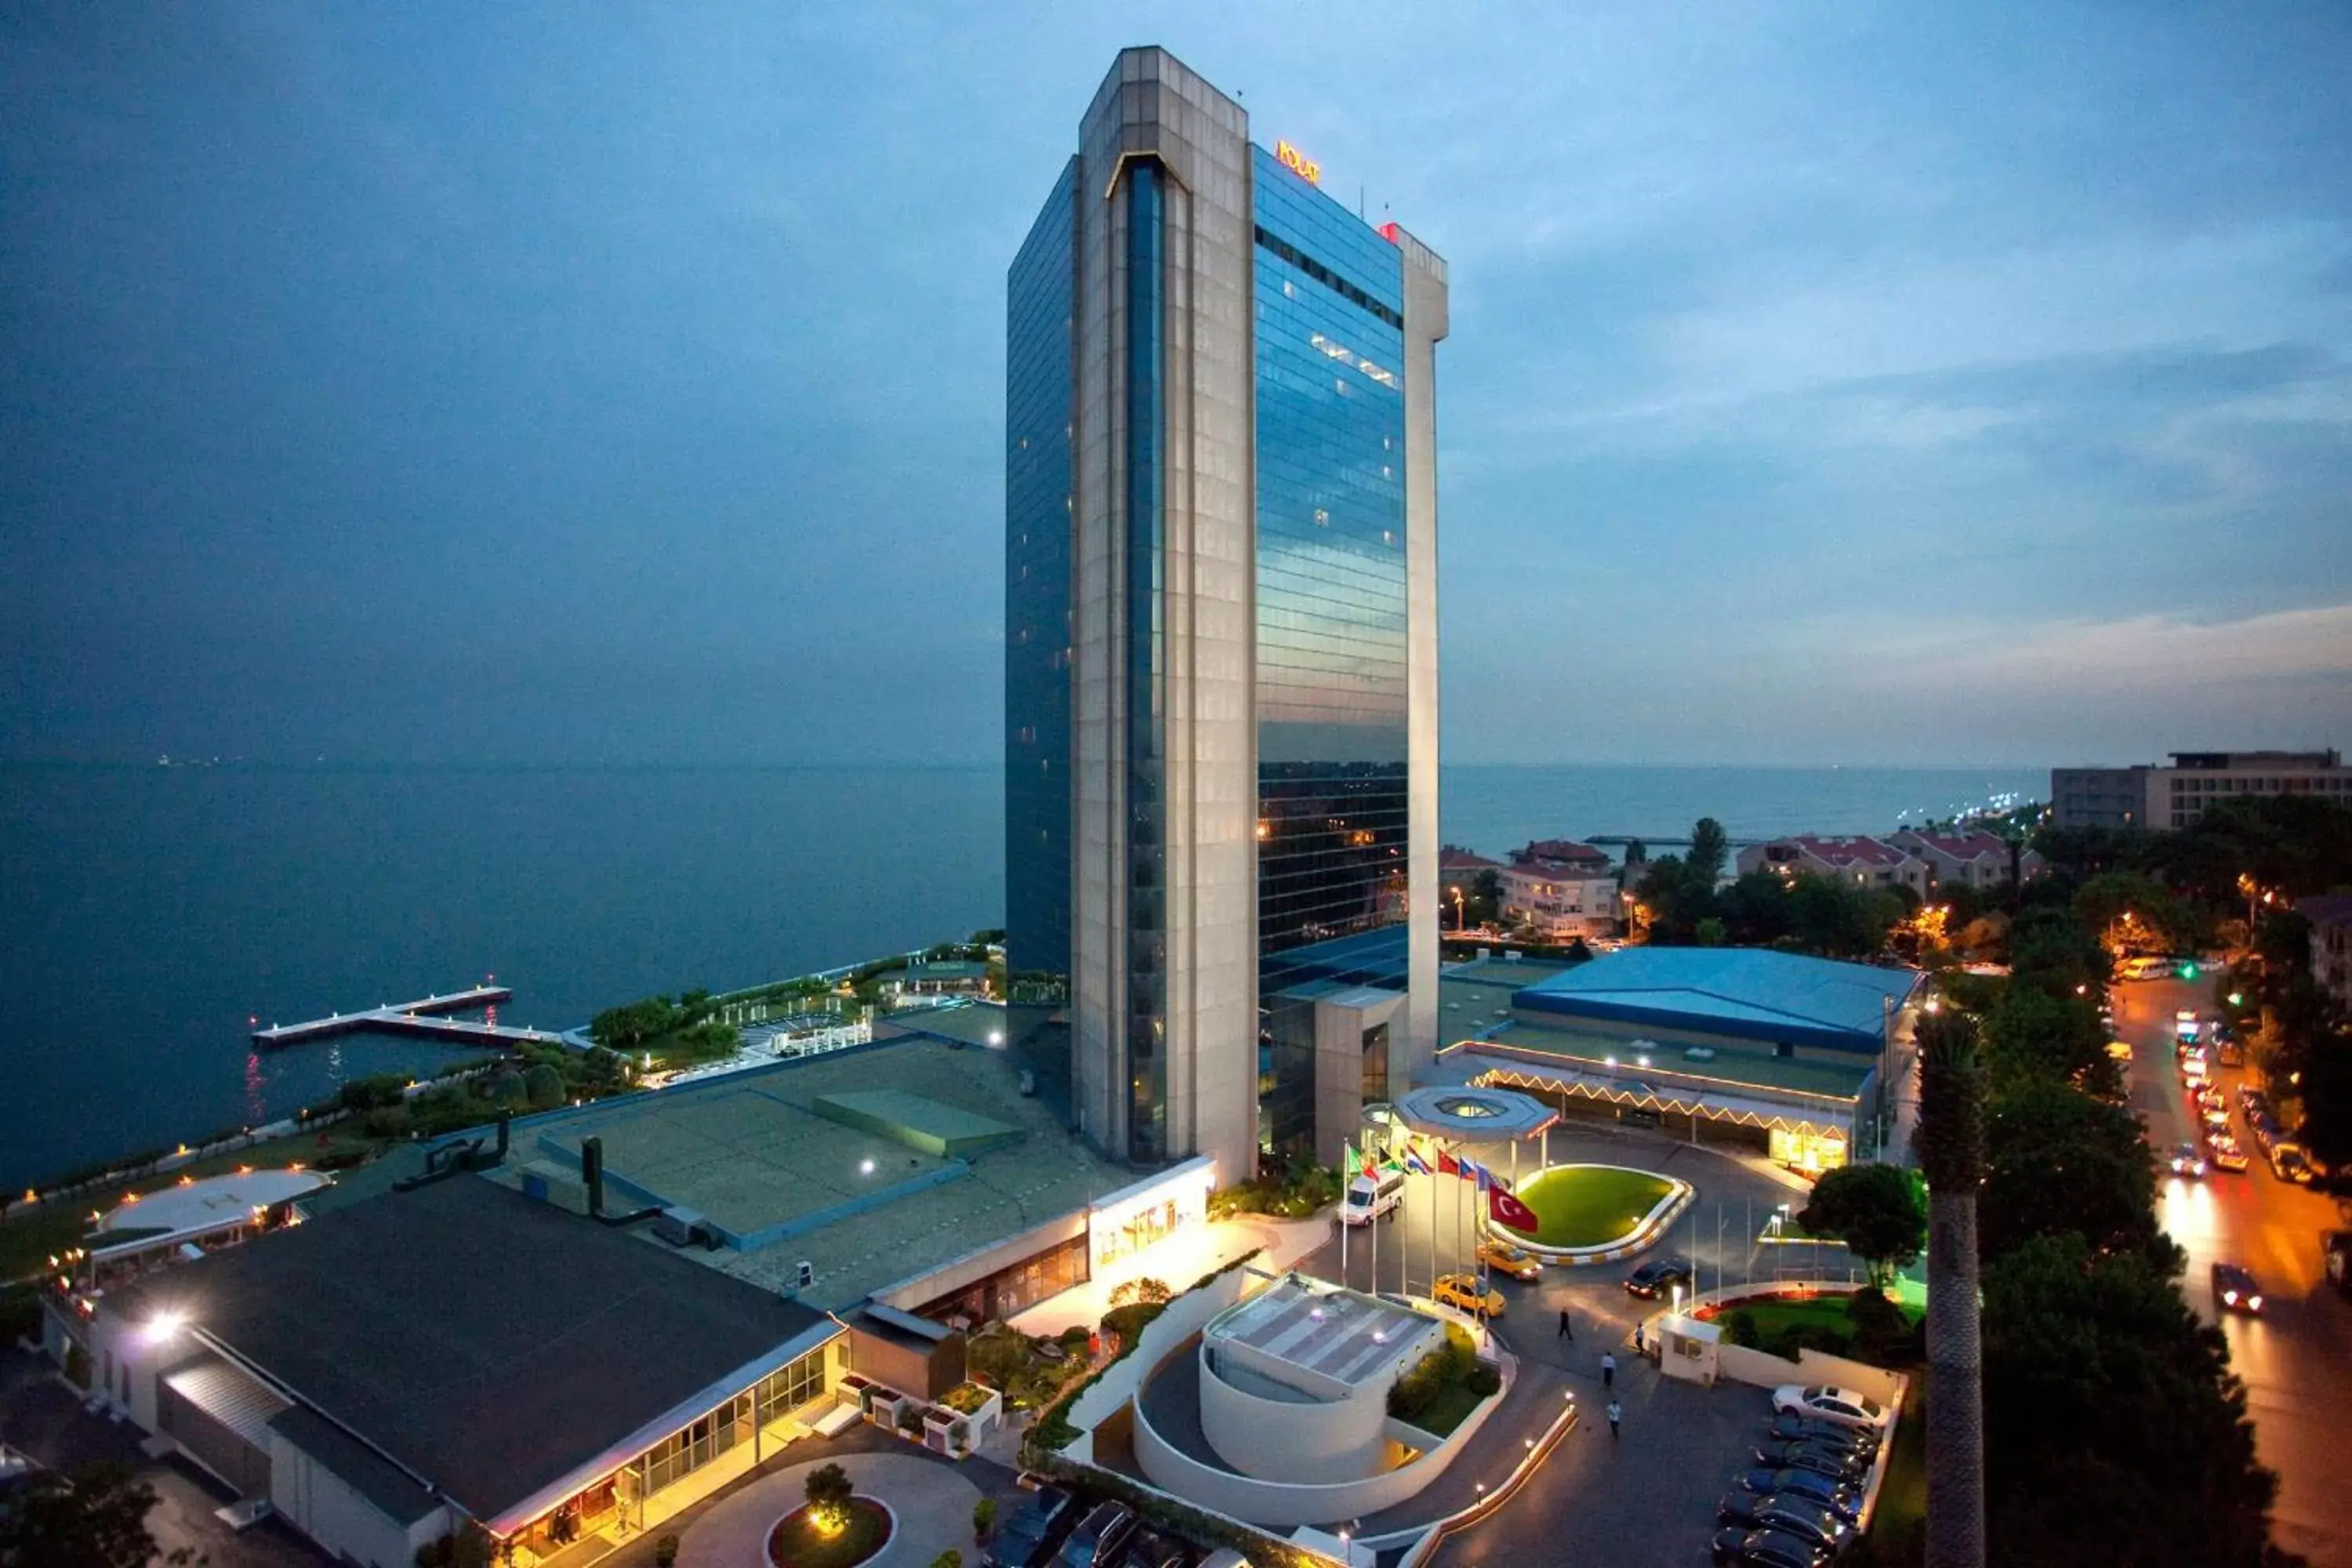 Property building in Renaissance Polat Istanbul Hotel